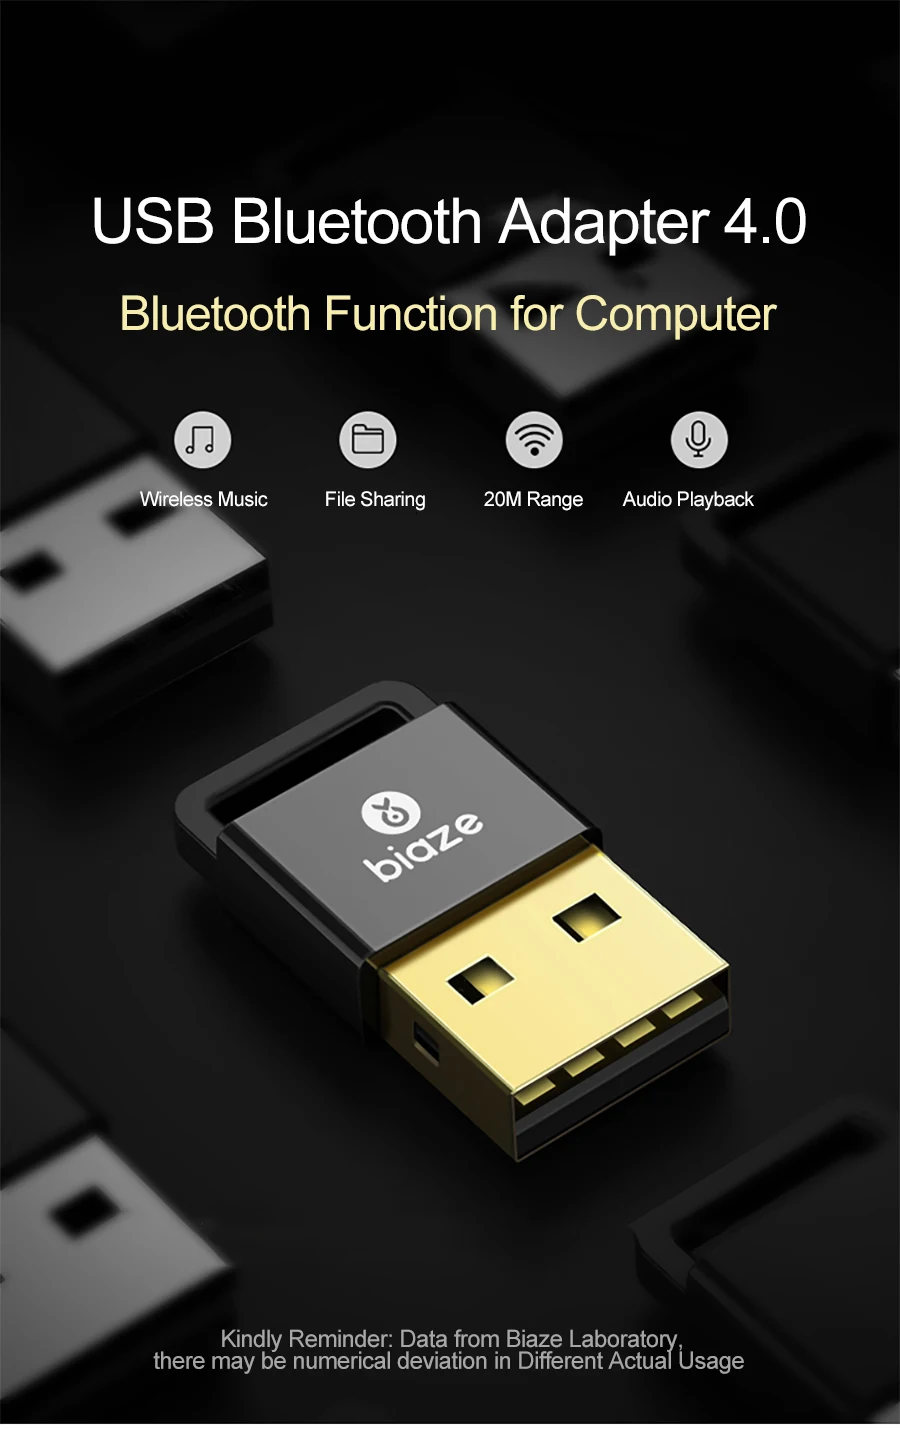 Biaze Bluetooth Adapter USB Dongle Laptop PC Wireless Mouse Bluetooth Speaker 4.0 Music Receiver USB Bluetooth Adapter v4.0 CSR